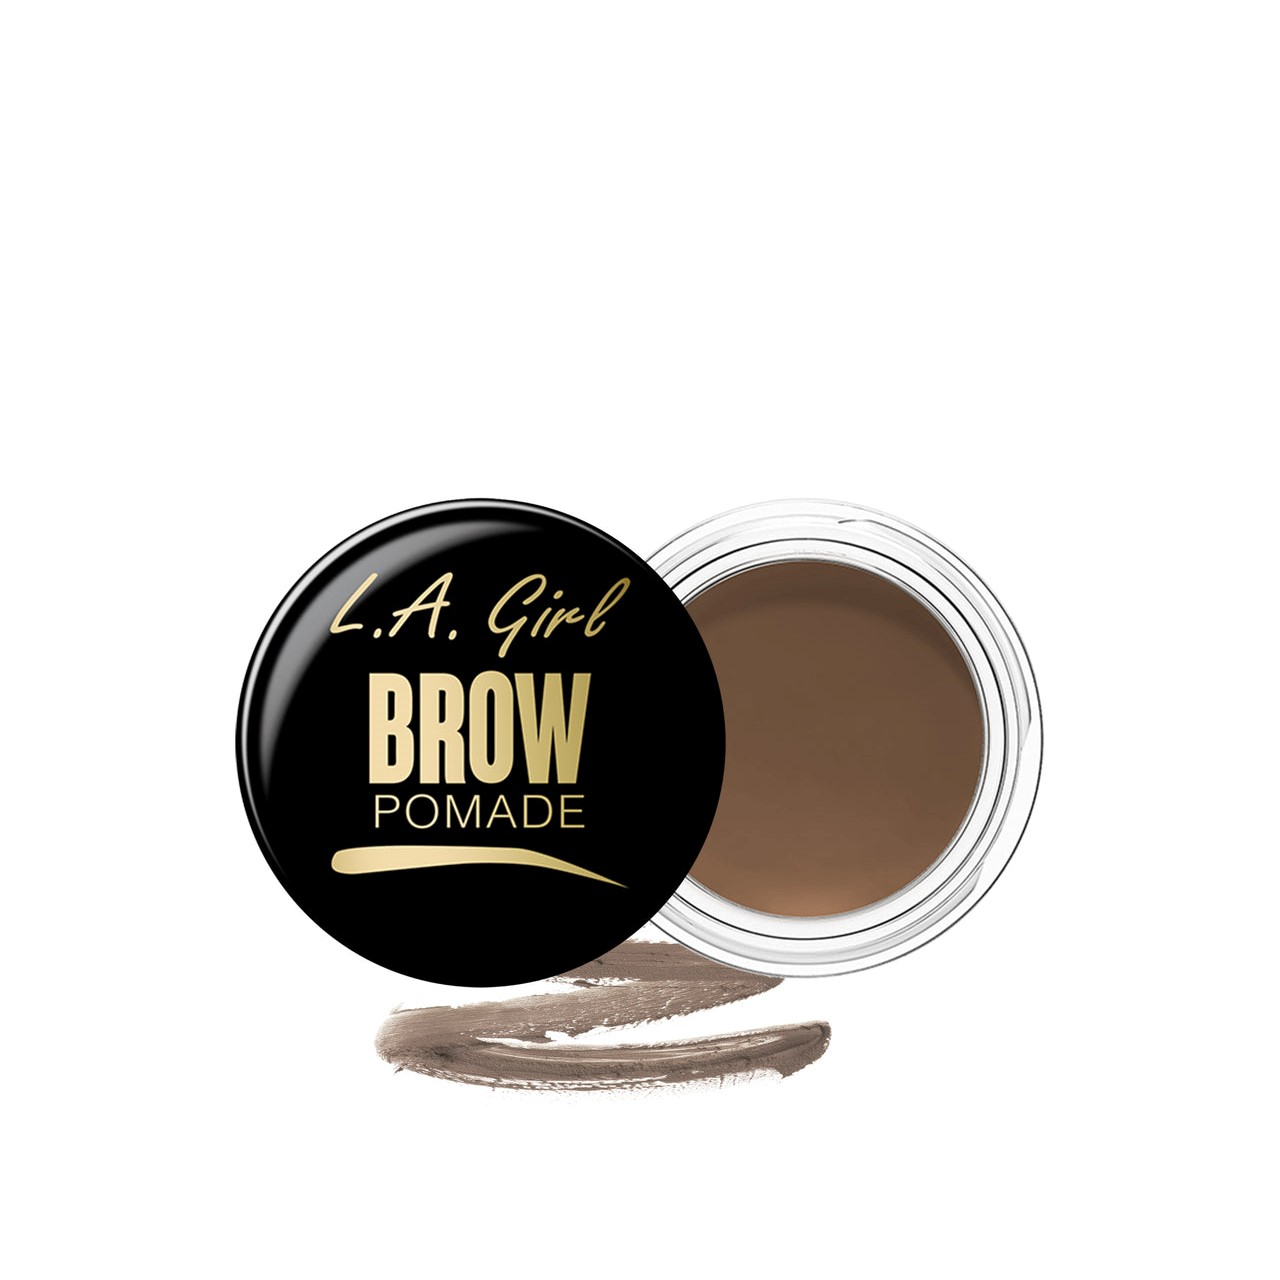 L.A. Girl Brow Pomade Blonde 3g (0.11oz)